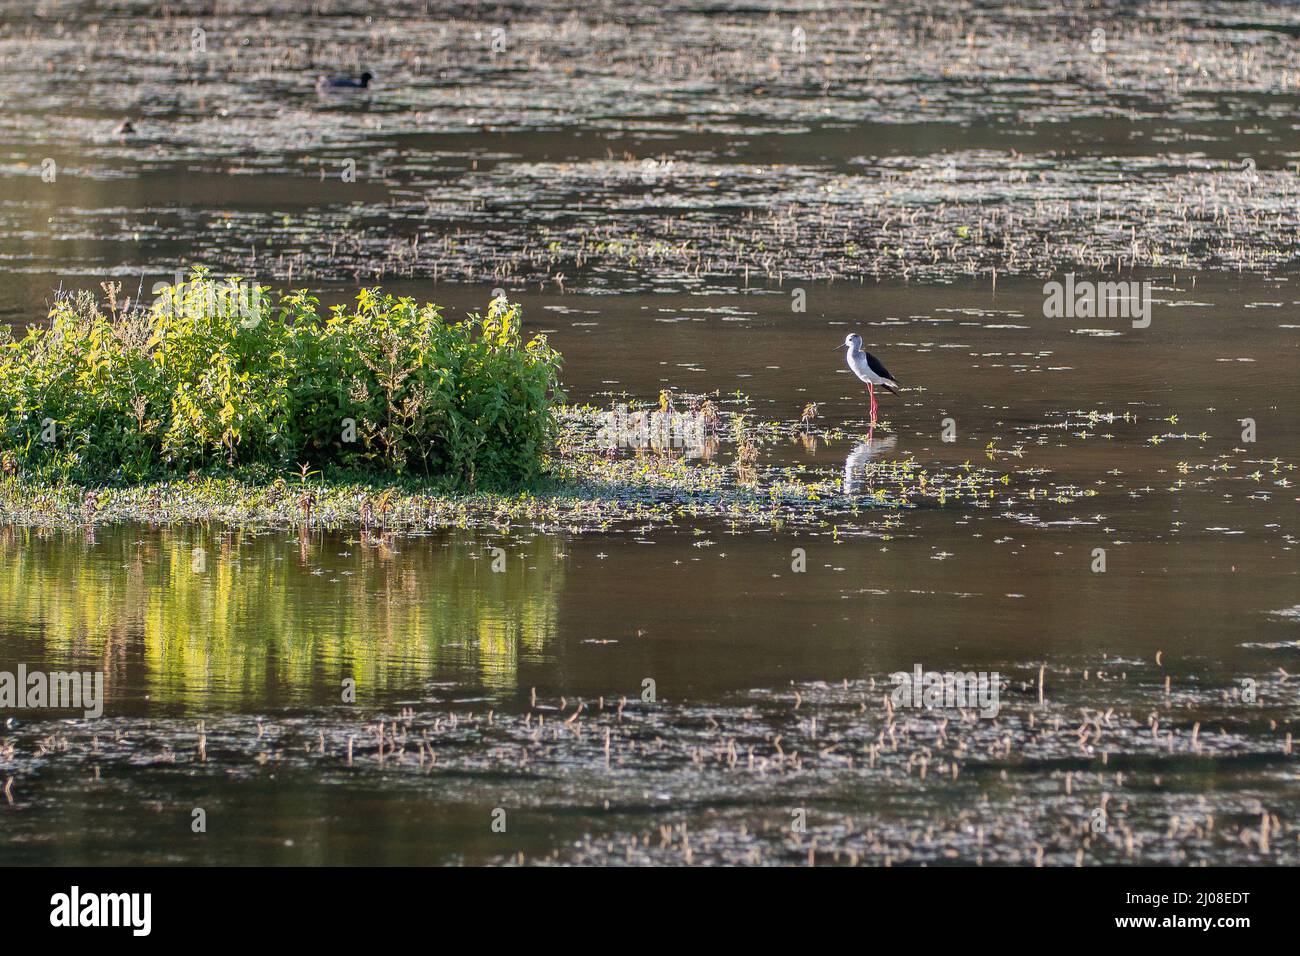 Egret, Little White Heron, Bird Looking for its Preys in a Pond. Stock Photo